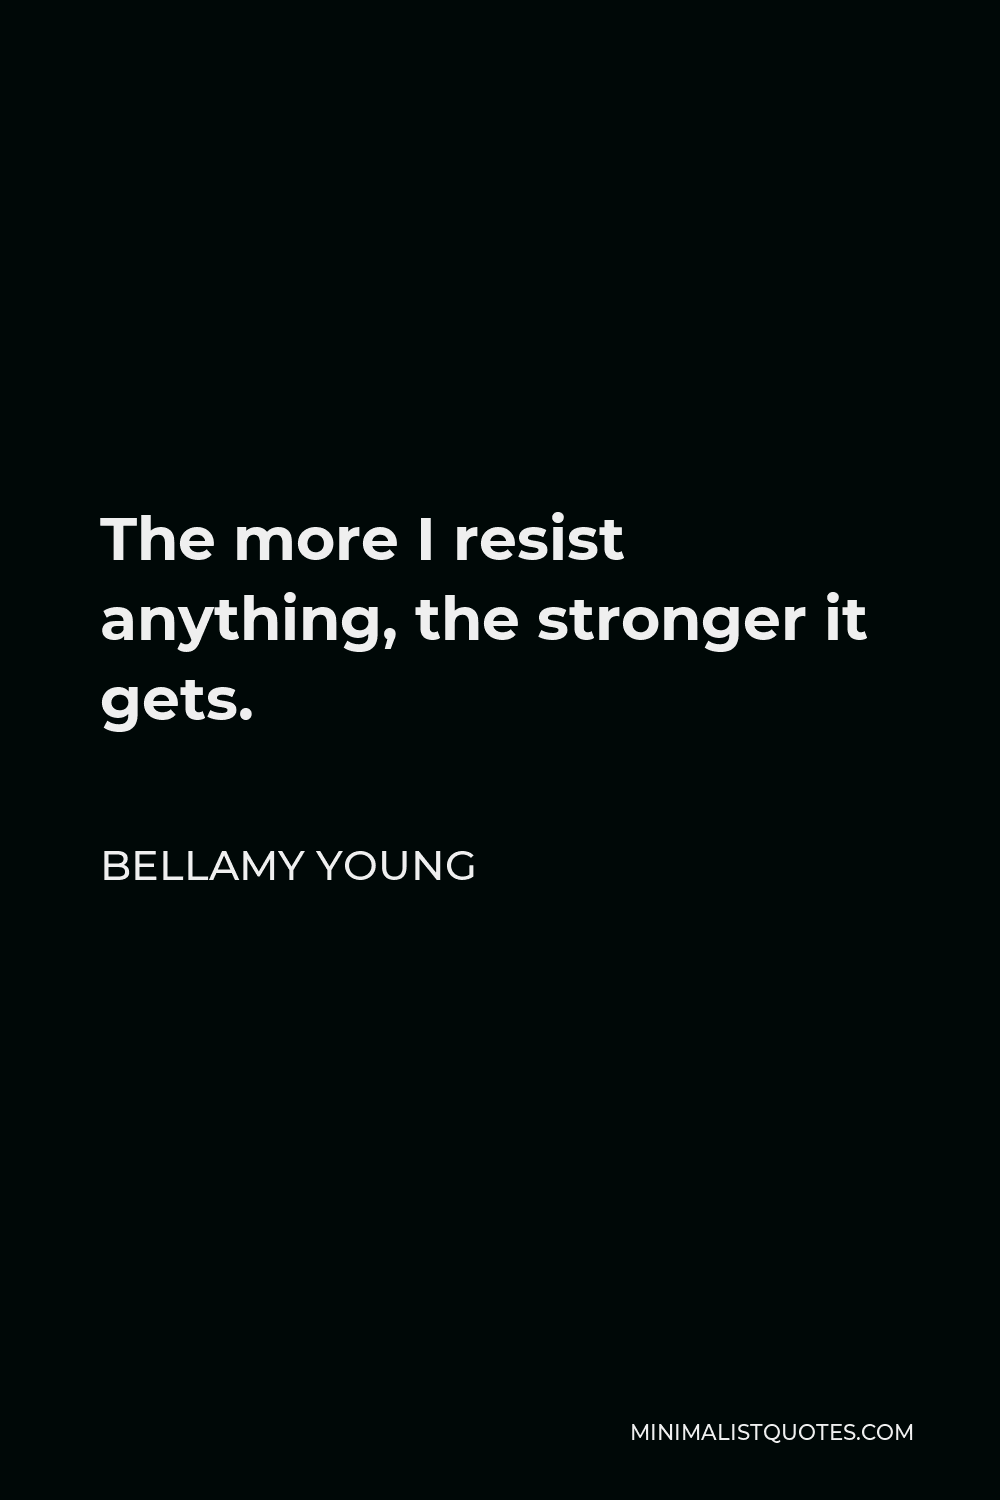 Bellamy Young Quote - The more I resist anything, the stronger it gets.